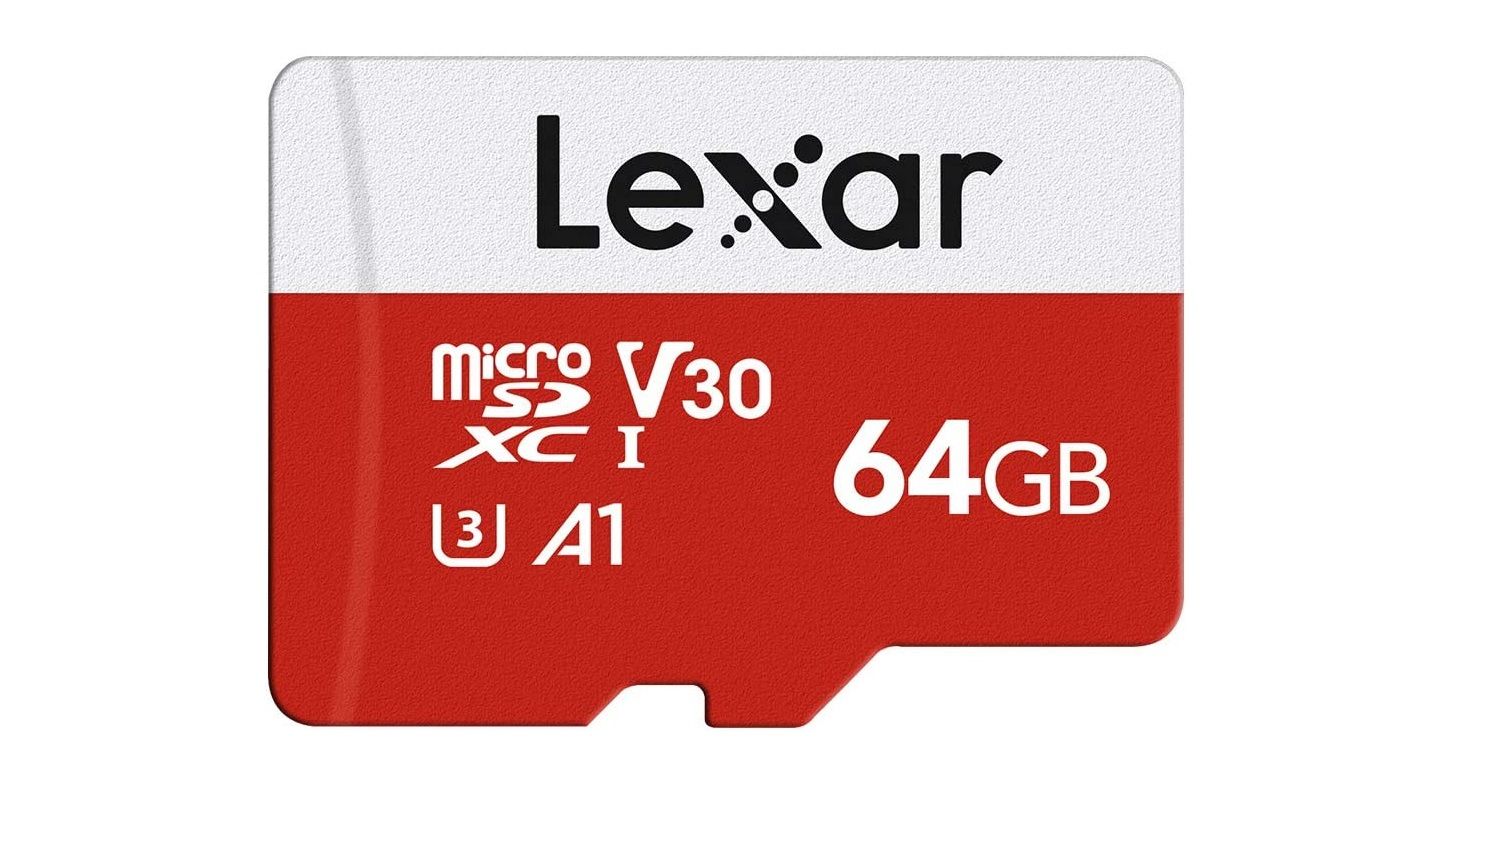 lexar 64gb microsd card featuring red and white coloring